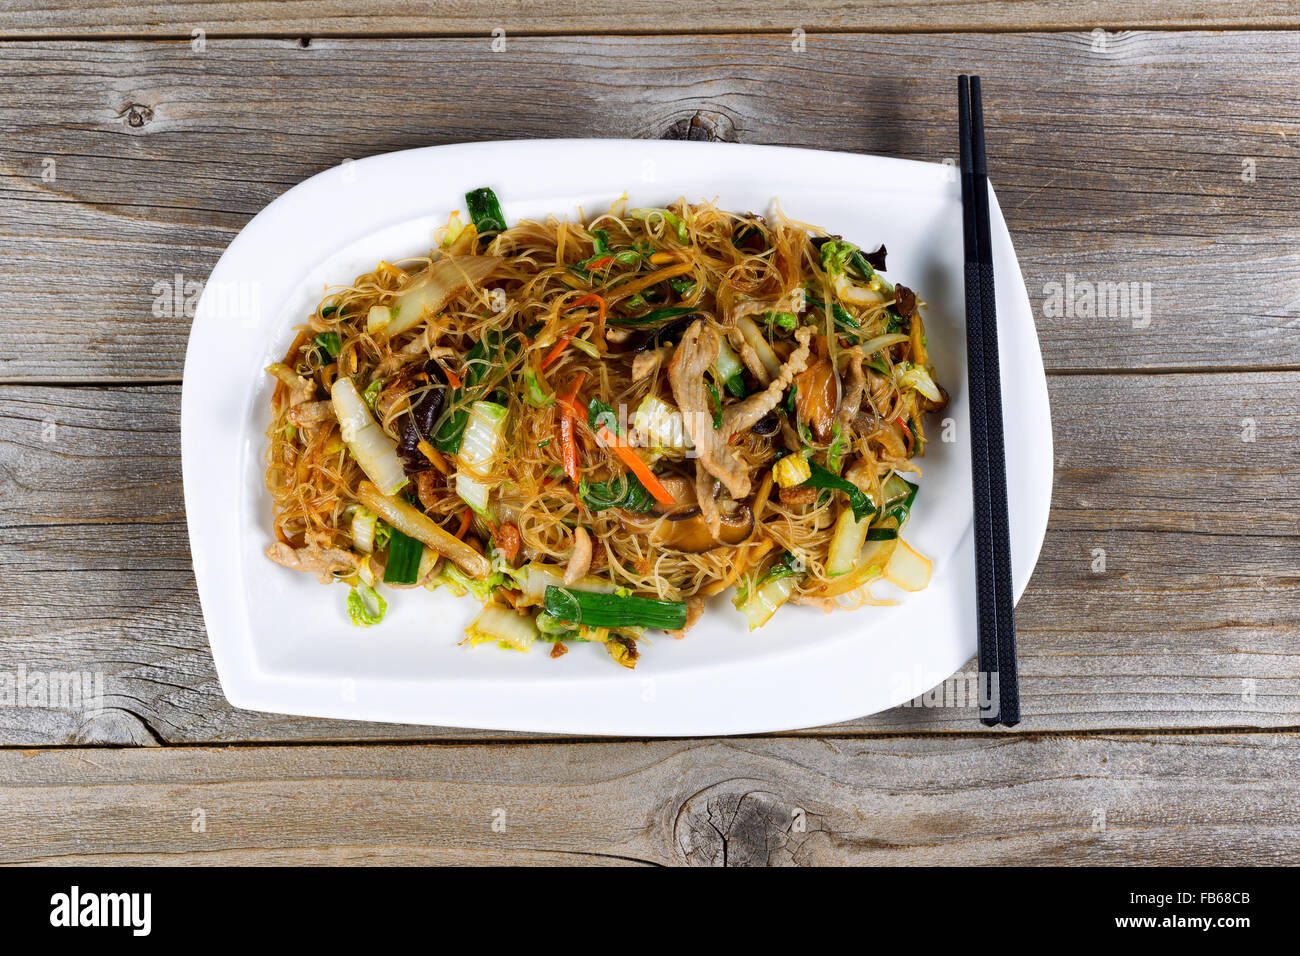 Angled view of cooked chicken strips and rice noodles with vegetables on rustic wood setting. Stock Photo